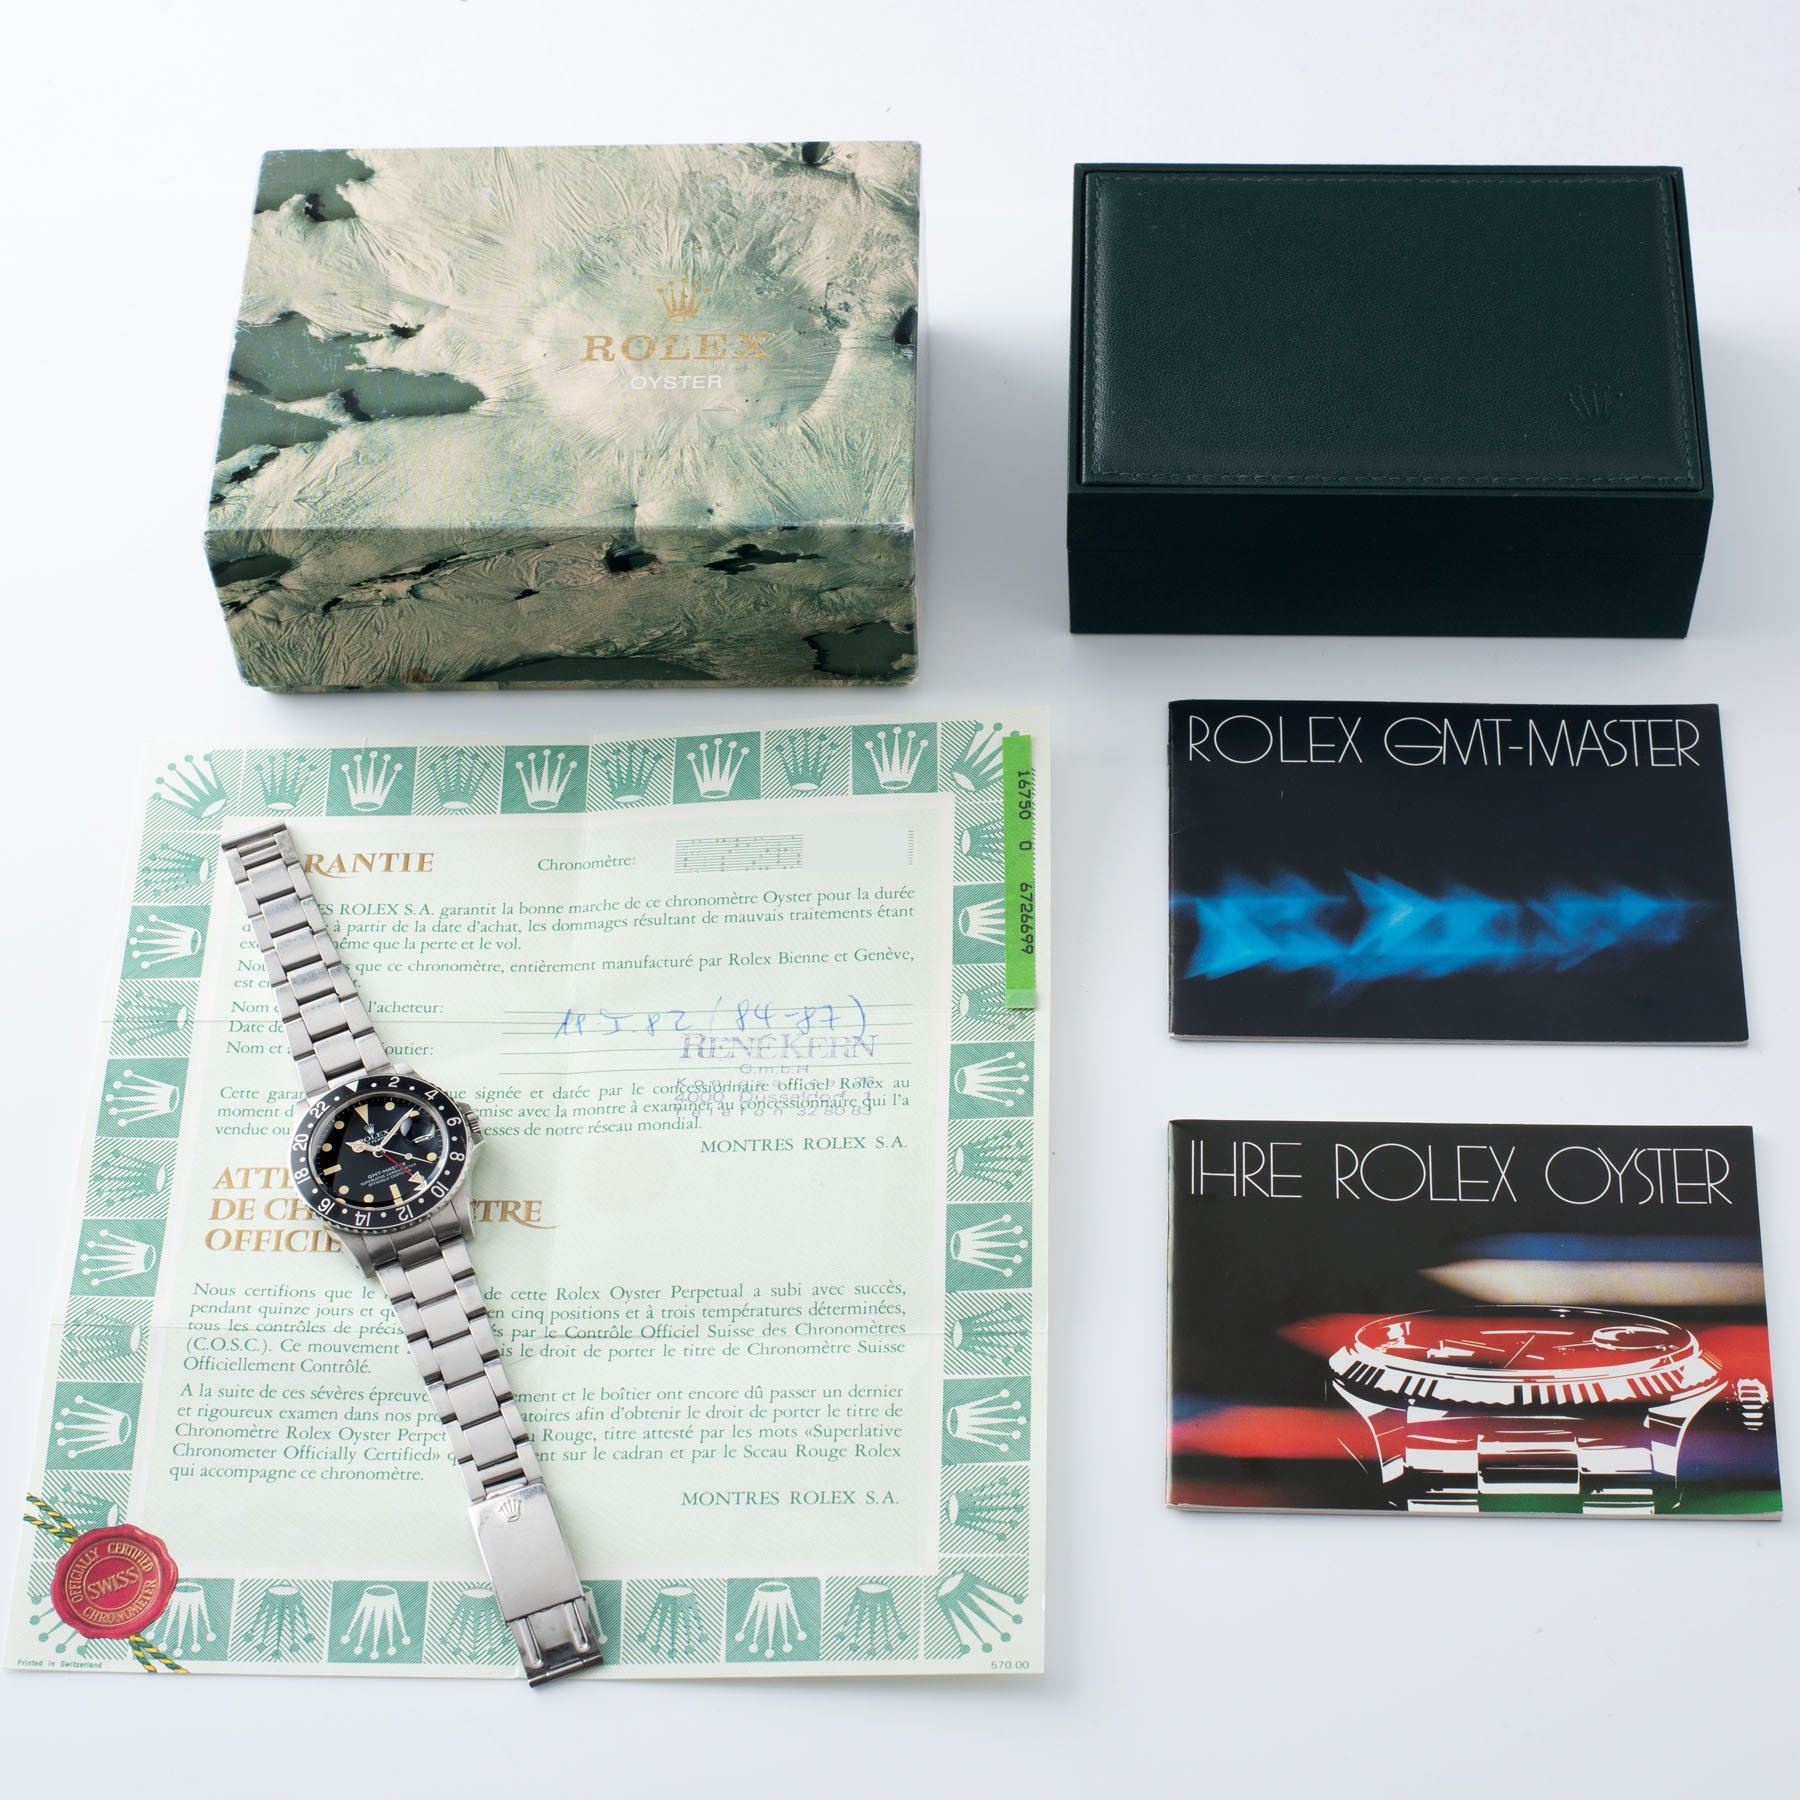 Rolex Gmt master 16750 matte dial with box & paper